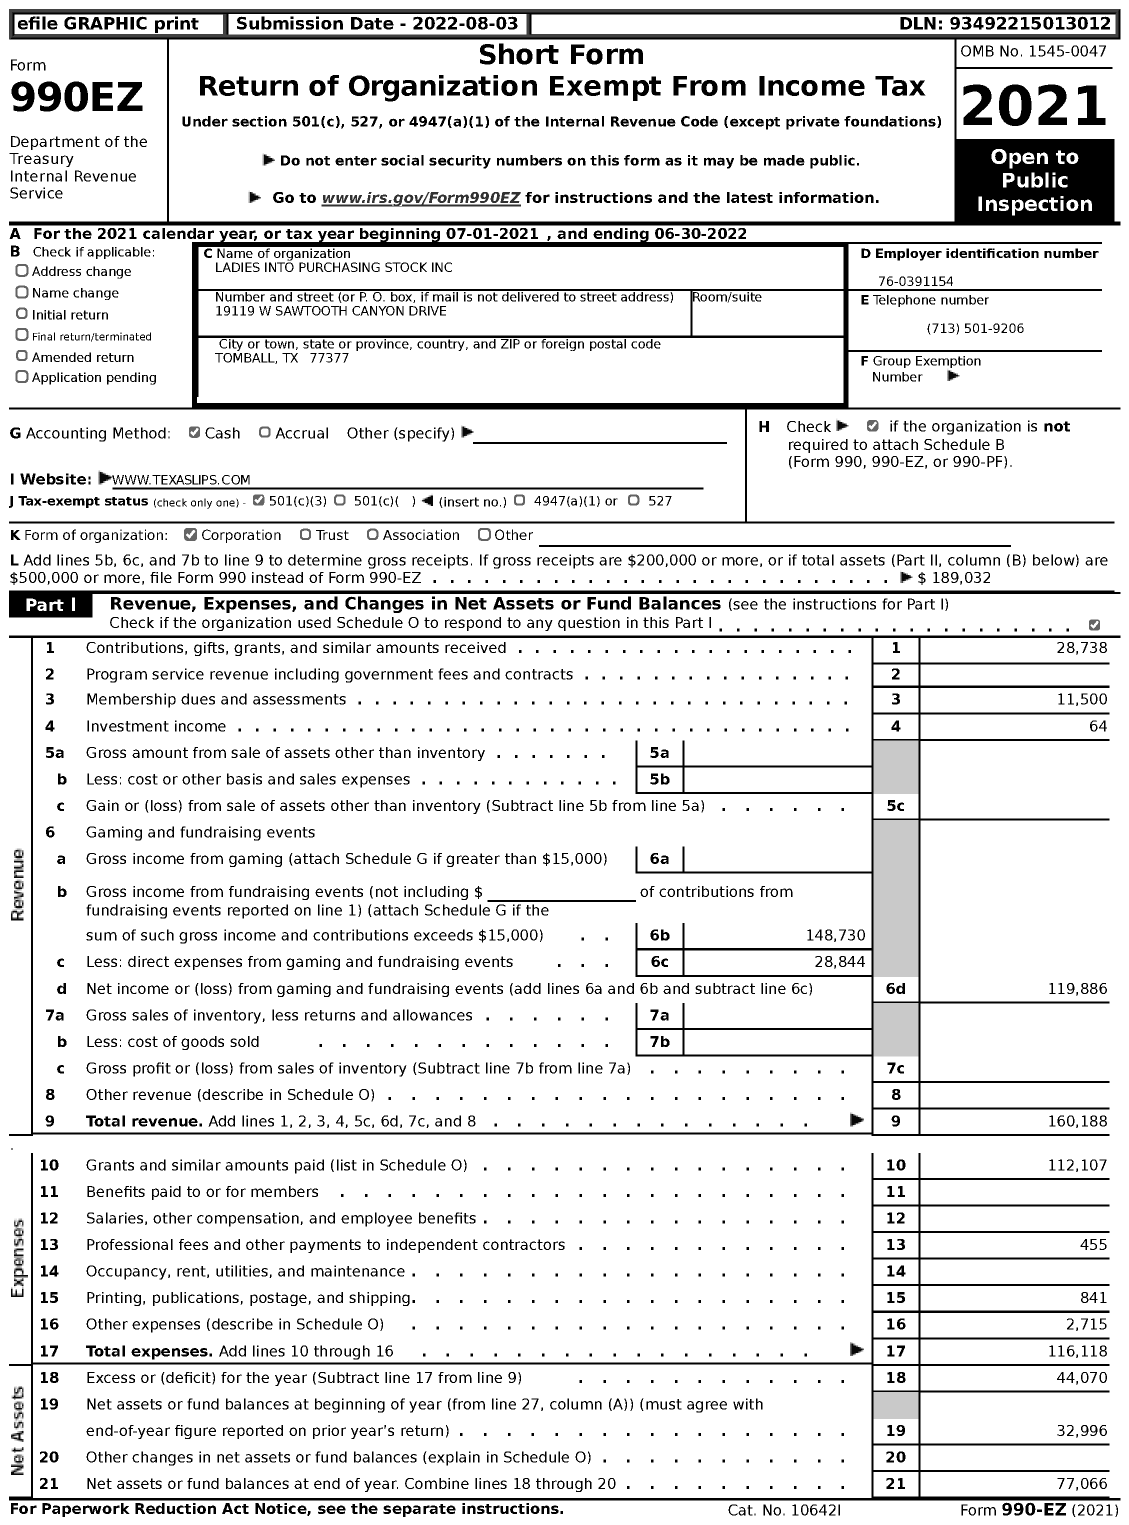 Image of first page of 2021 Form 990EZ for Ladies Into Purchasing Stock